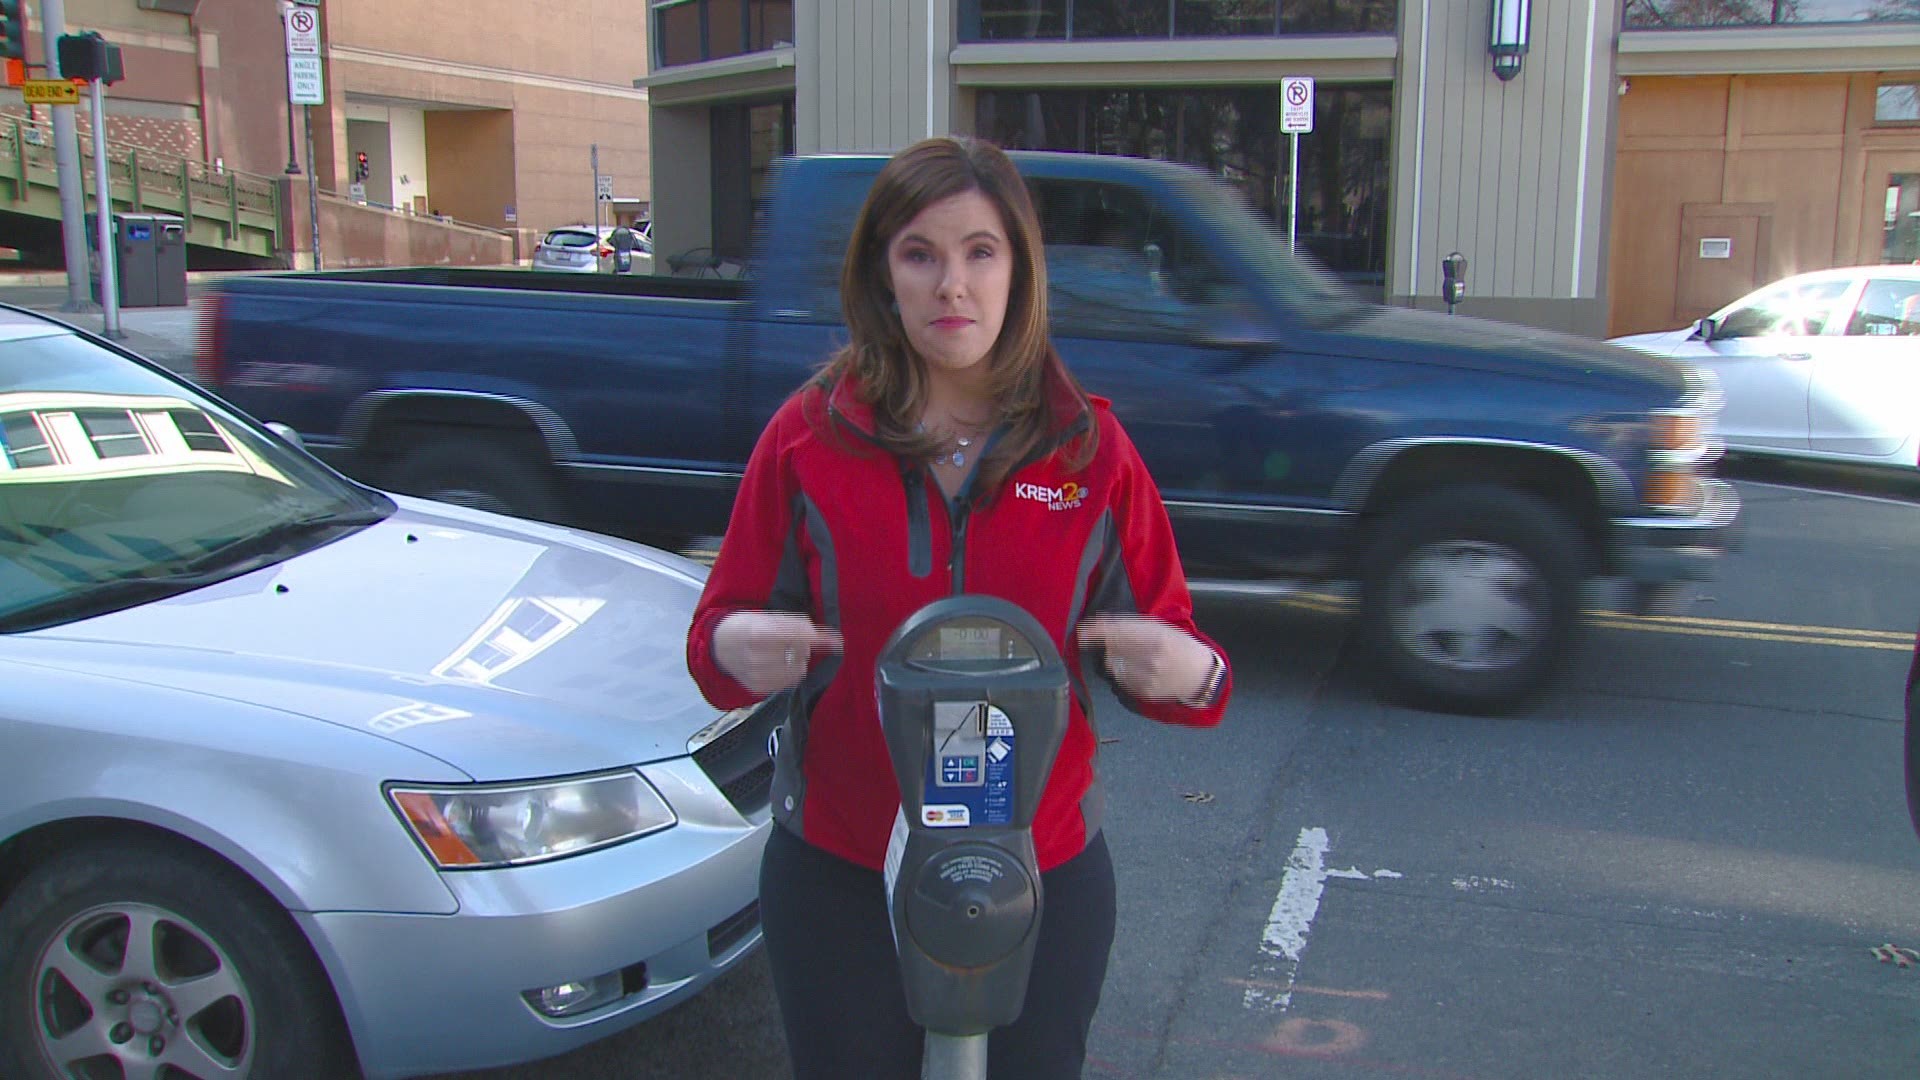 The city is asking the public to give input on six potential parking meter options.